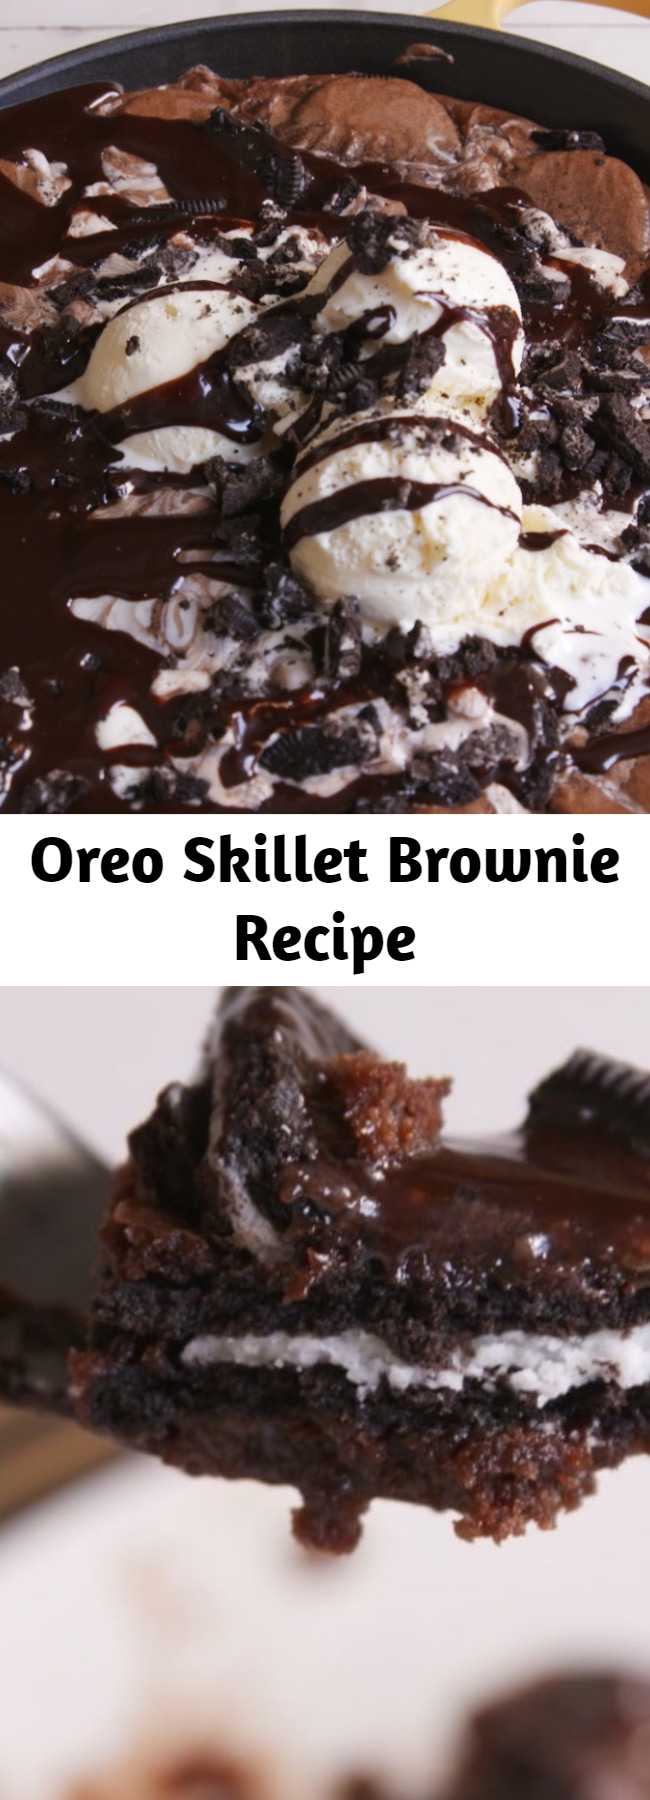 Oreo Skillet Brownie Recipe - Looking for an over-the-top Oreo brownie recipe? This Oreo Stuffed Skillet Brownie is the bomb. Only true Oreo lovers need apply.